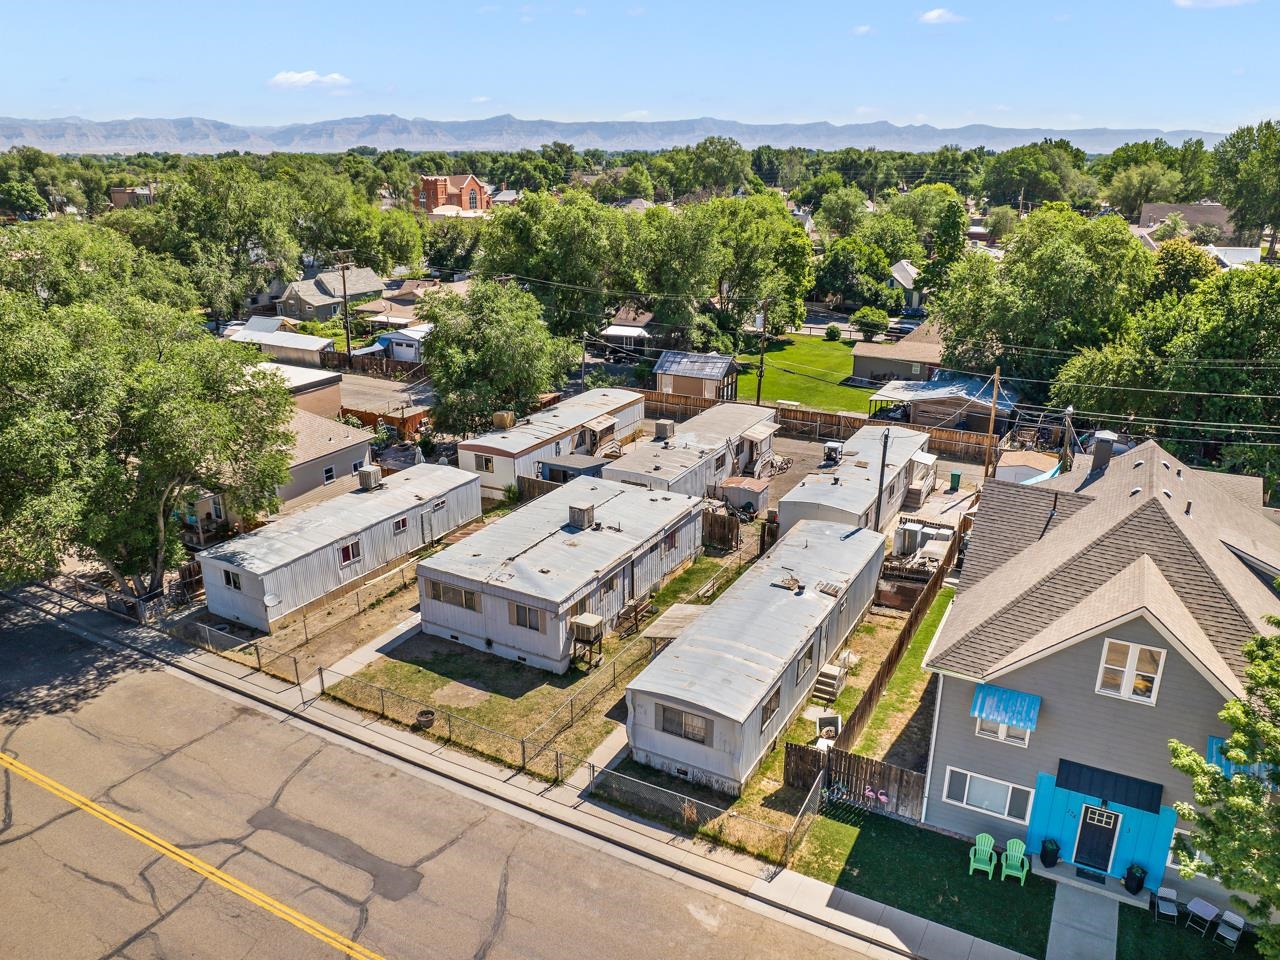 OR BEST OFFER! Discover an exceptional investment opportunity just off S Mulberry Street in the vibrant community of Fruita, Colorado! Presenting a rare chance to own a multi-family property with six manufactured homes, this offering is brimming with potential. Unlock the possibilities for growth and enhancement within this versatile property. With five single wides and one double wide, you will be poised to cater to a diverse range of tenants and needs. Whether it's modernizing interiors or enhancing amenities, there's room to elevate the living experience for occupants. Positioned in close proximity to downtown Fruita, residents will appreciate the convenience of city living. From eclectic dining and shopping to outdoor recreational pursuits, the essence of Fruita is just moments from their doorstep. Seize the opportunity to generate rental income while placing your stamp on the charming town of Fruita. Don't let this prime investment slip away. Contact us today to uncover more about this promising venture and schedule a showing!